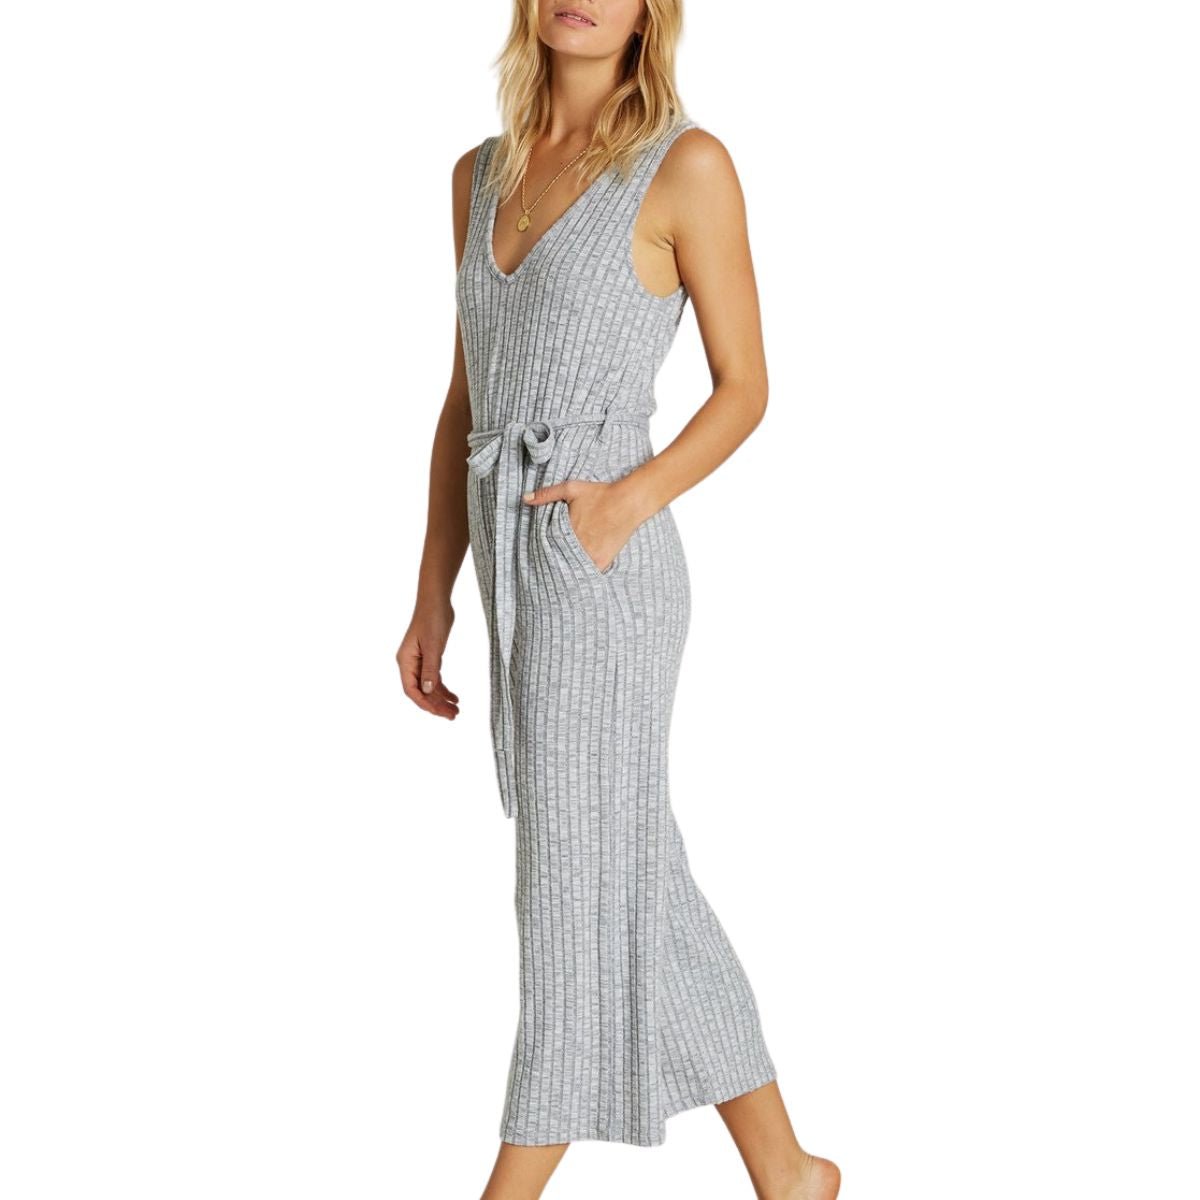 Billabong Wipe Out Jumpsuit in Ash Heather - BoardCo